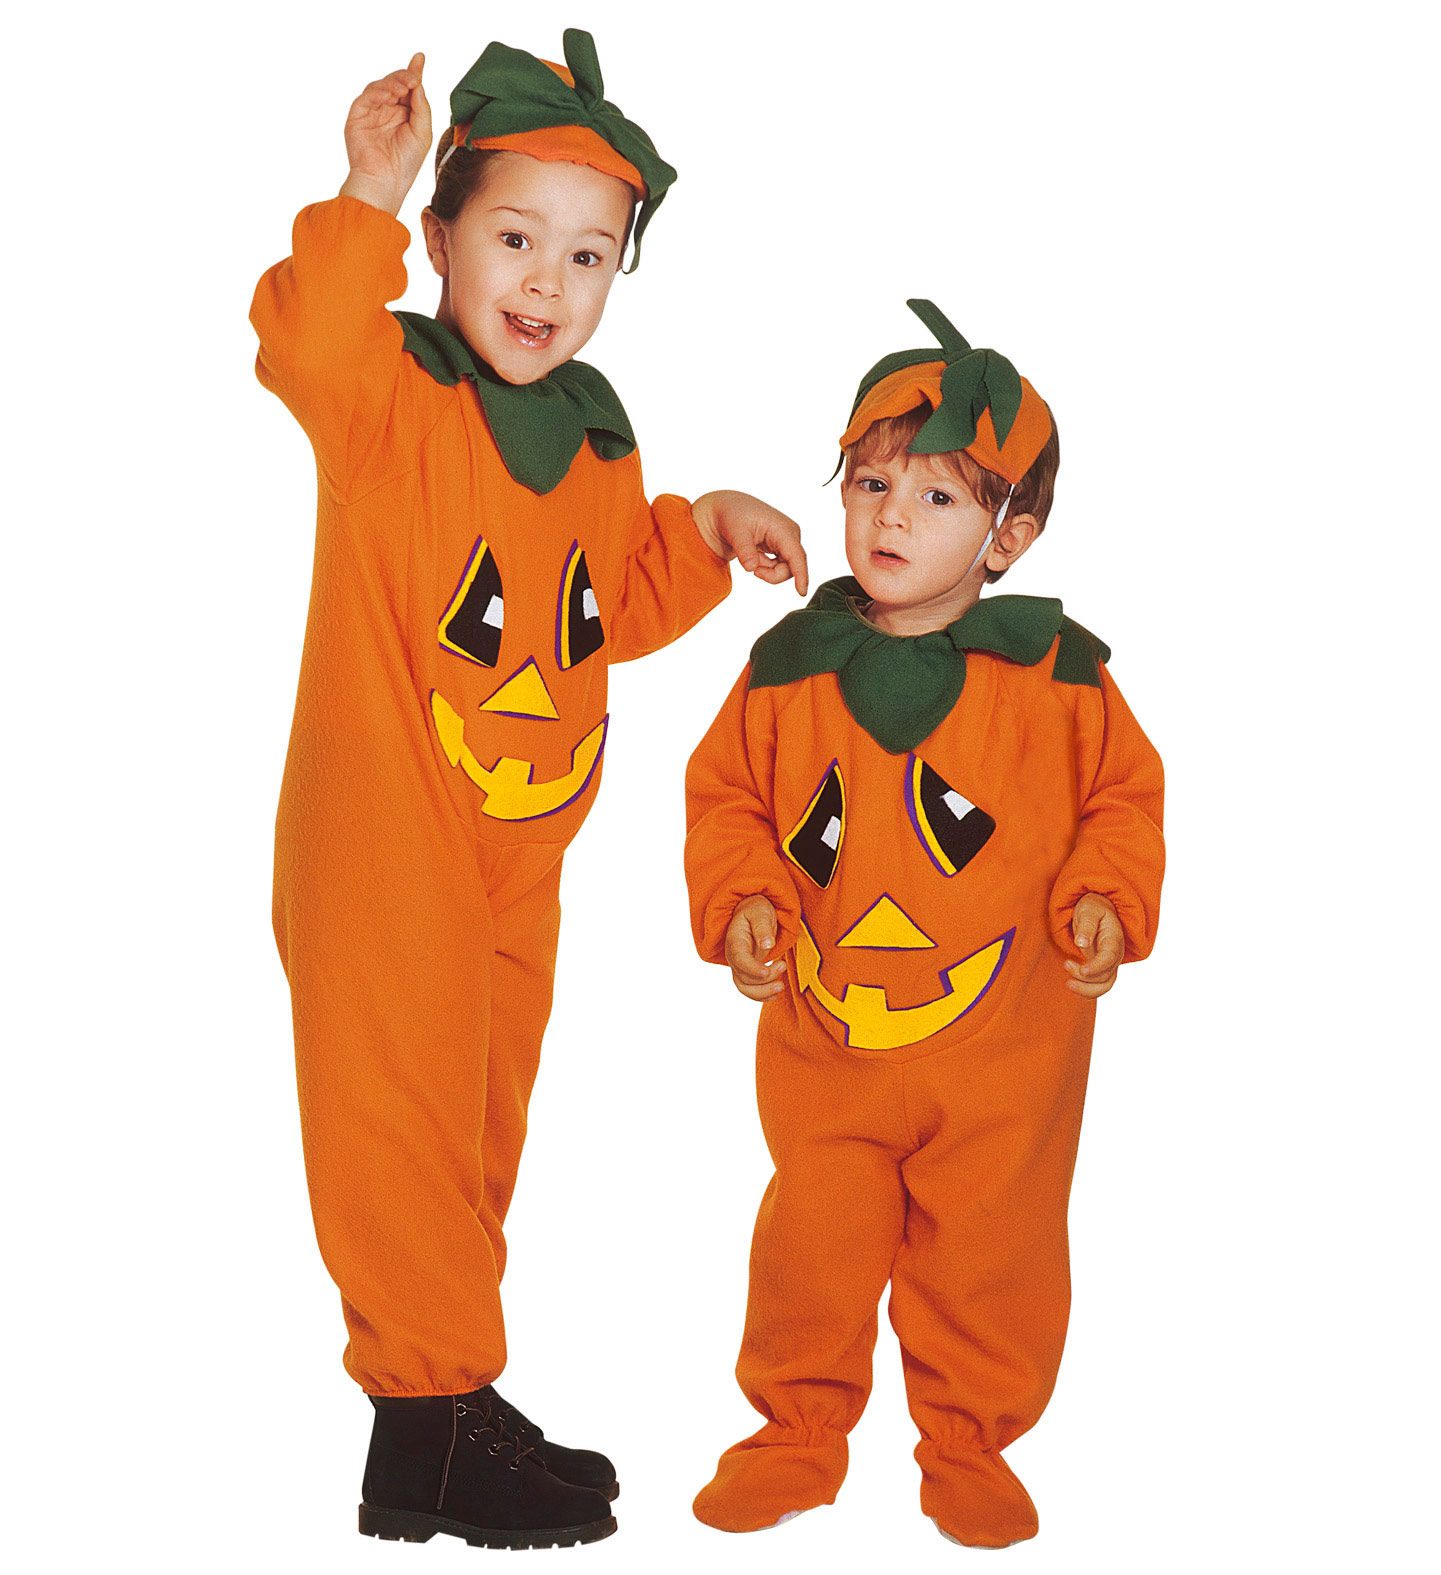 Stop by opportunity Hare Costum Dovleac Copii Halloween - Carnaval Fiesta Costume si Accesorii